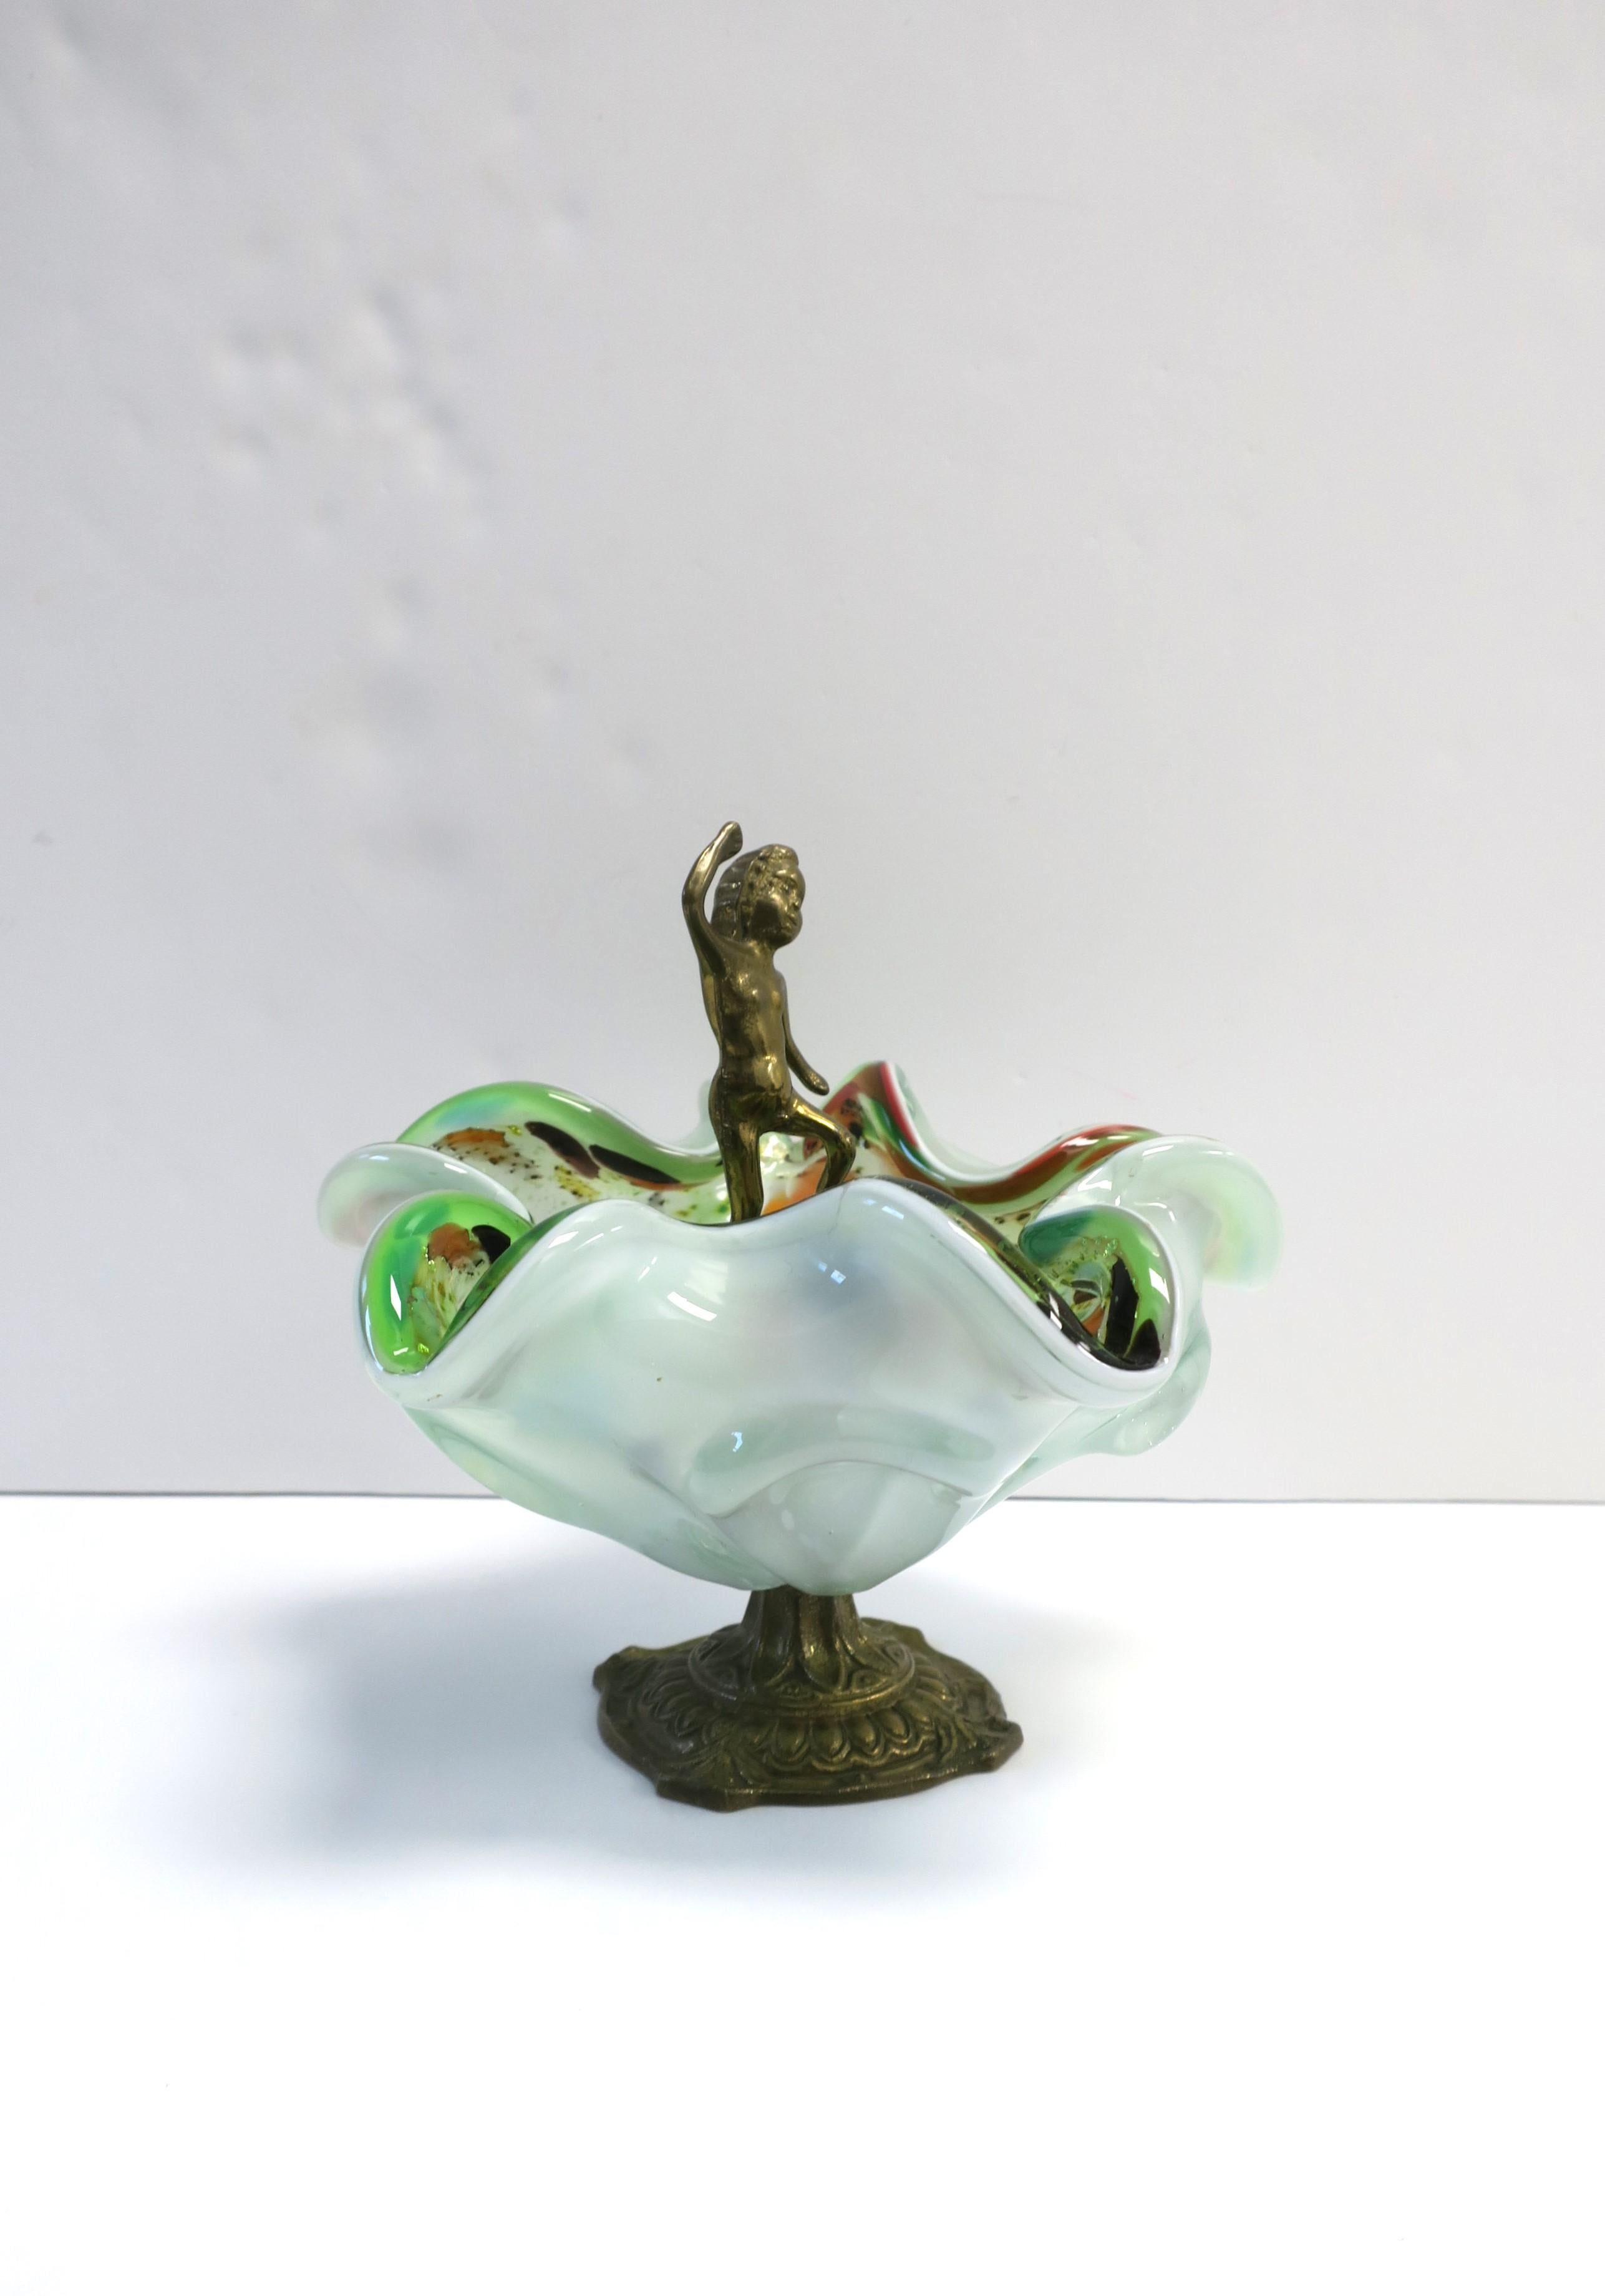 Italian Murano Art Glass Bowl with Brass Nude Male Figure, 1960s For Sale 1